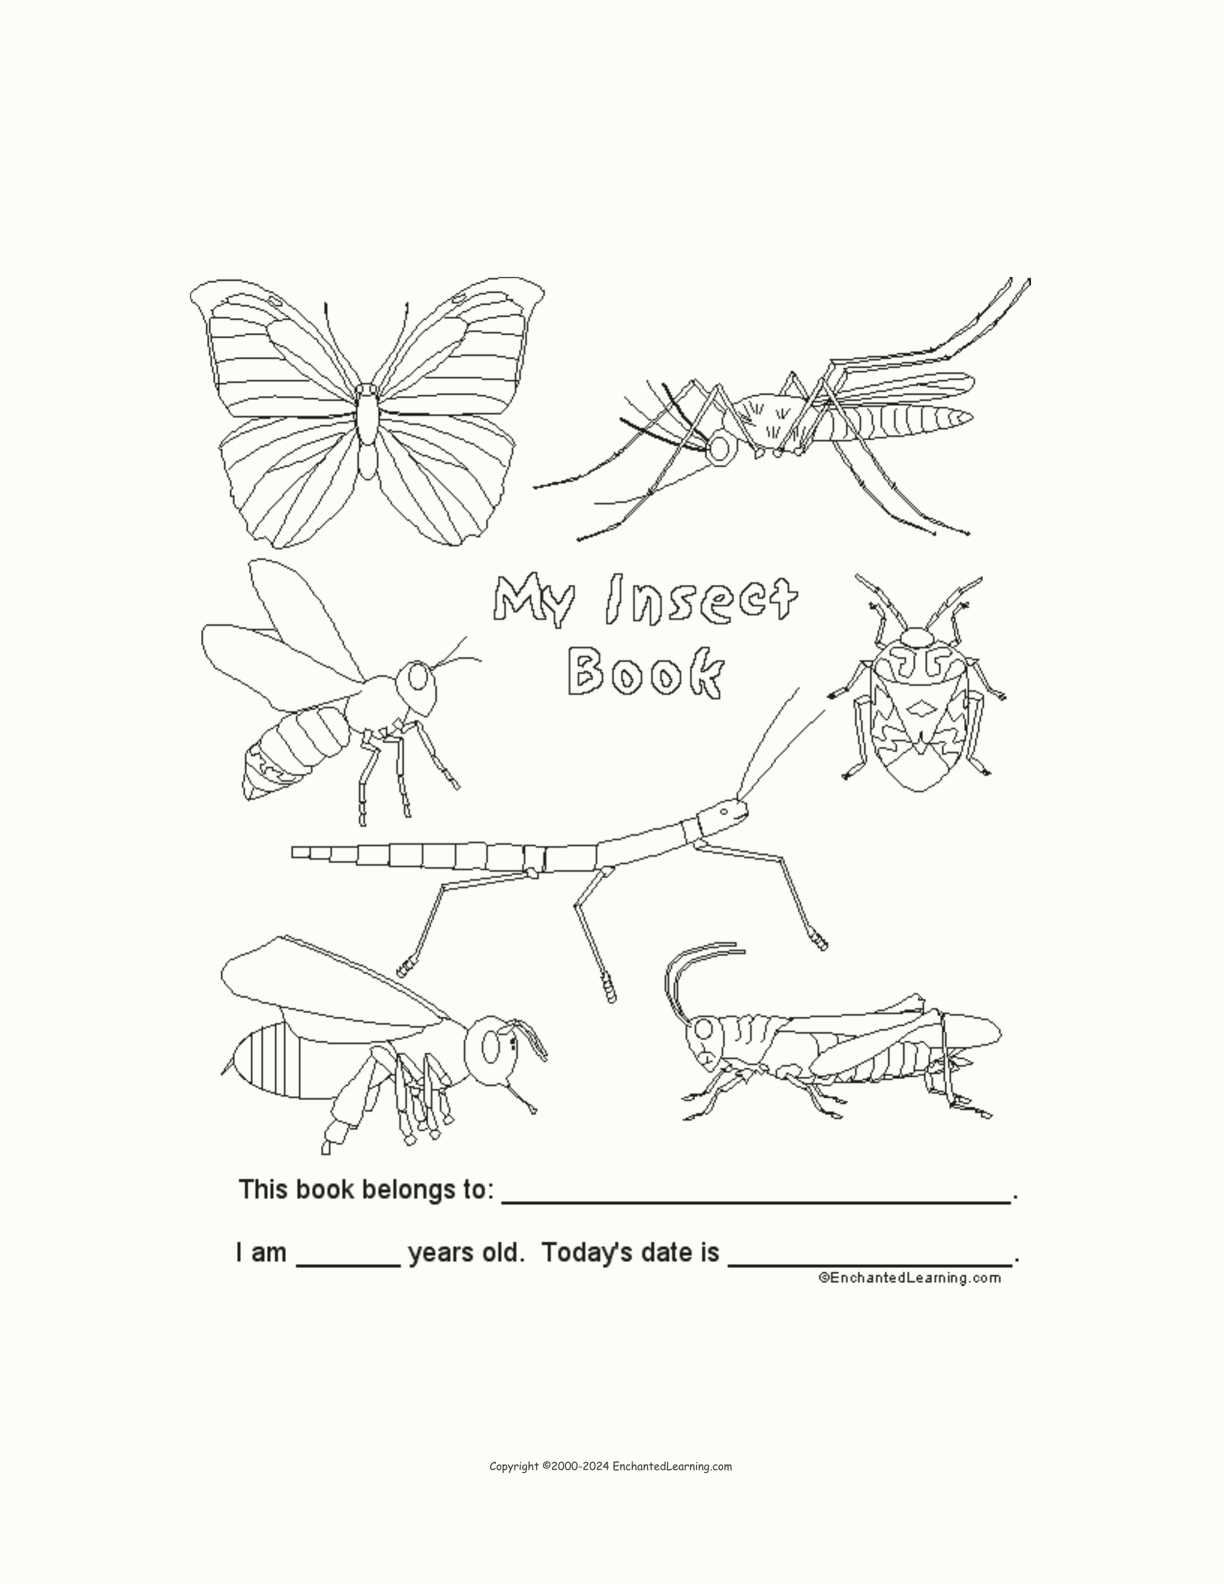 Insect Book (Cover Template) interactive printout page 1